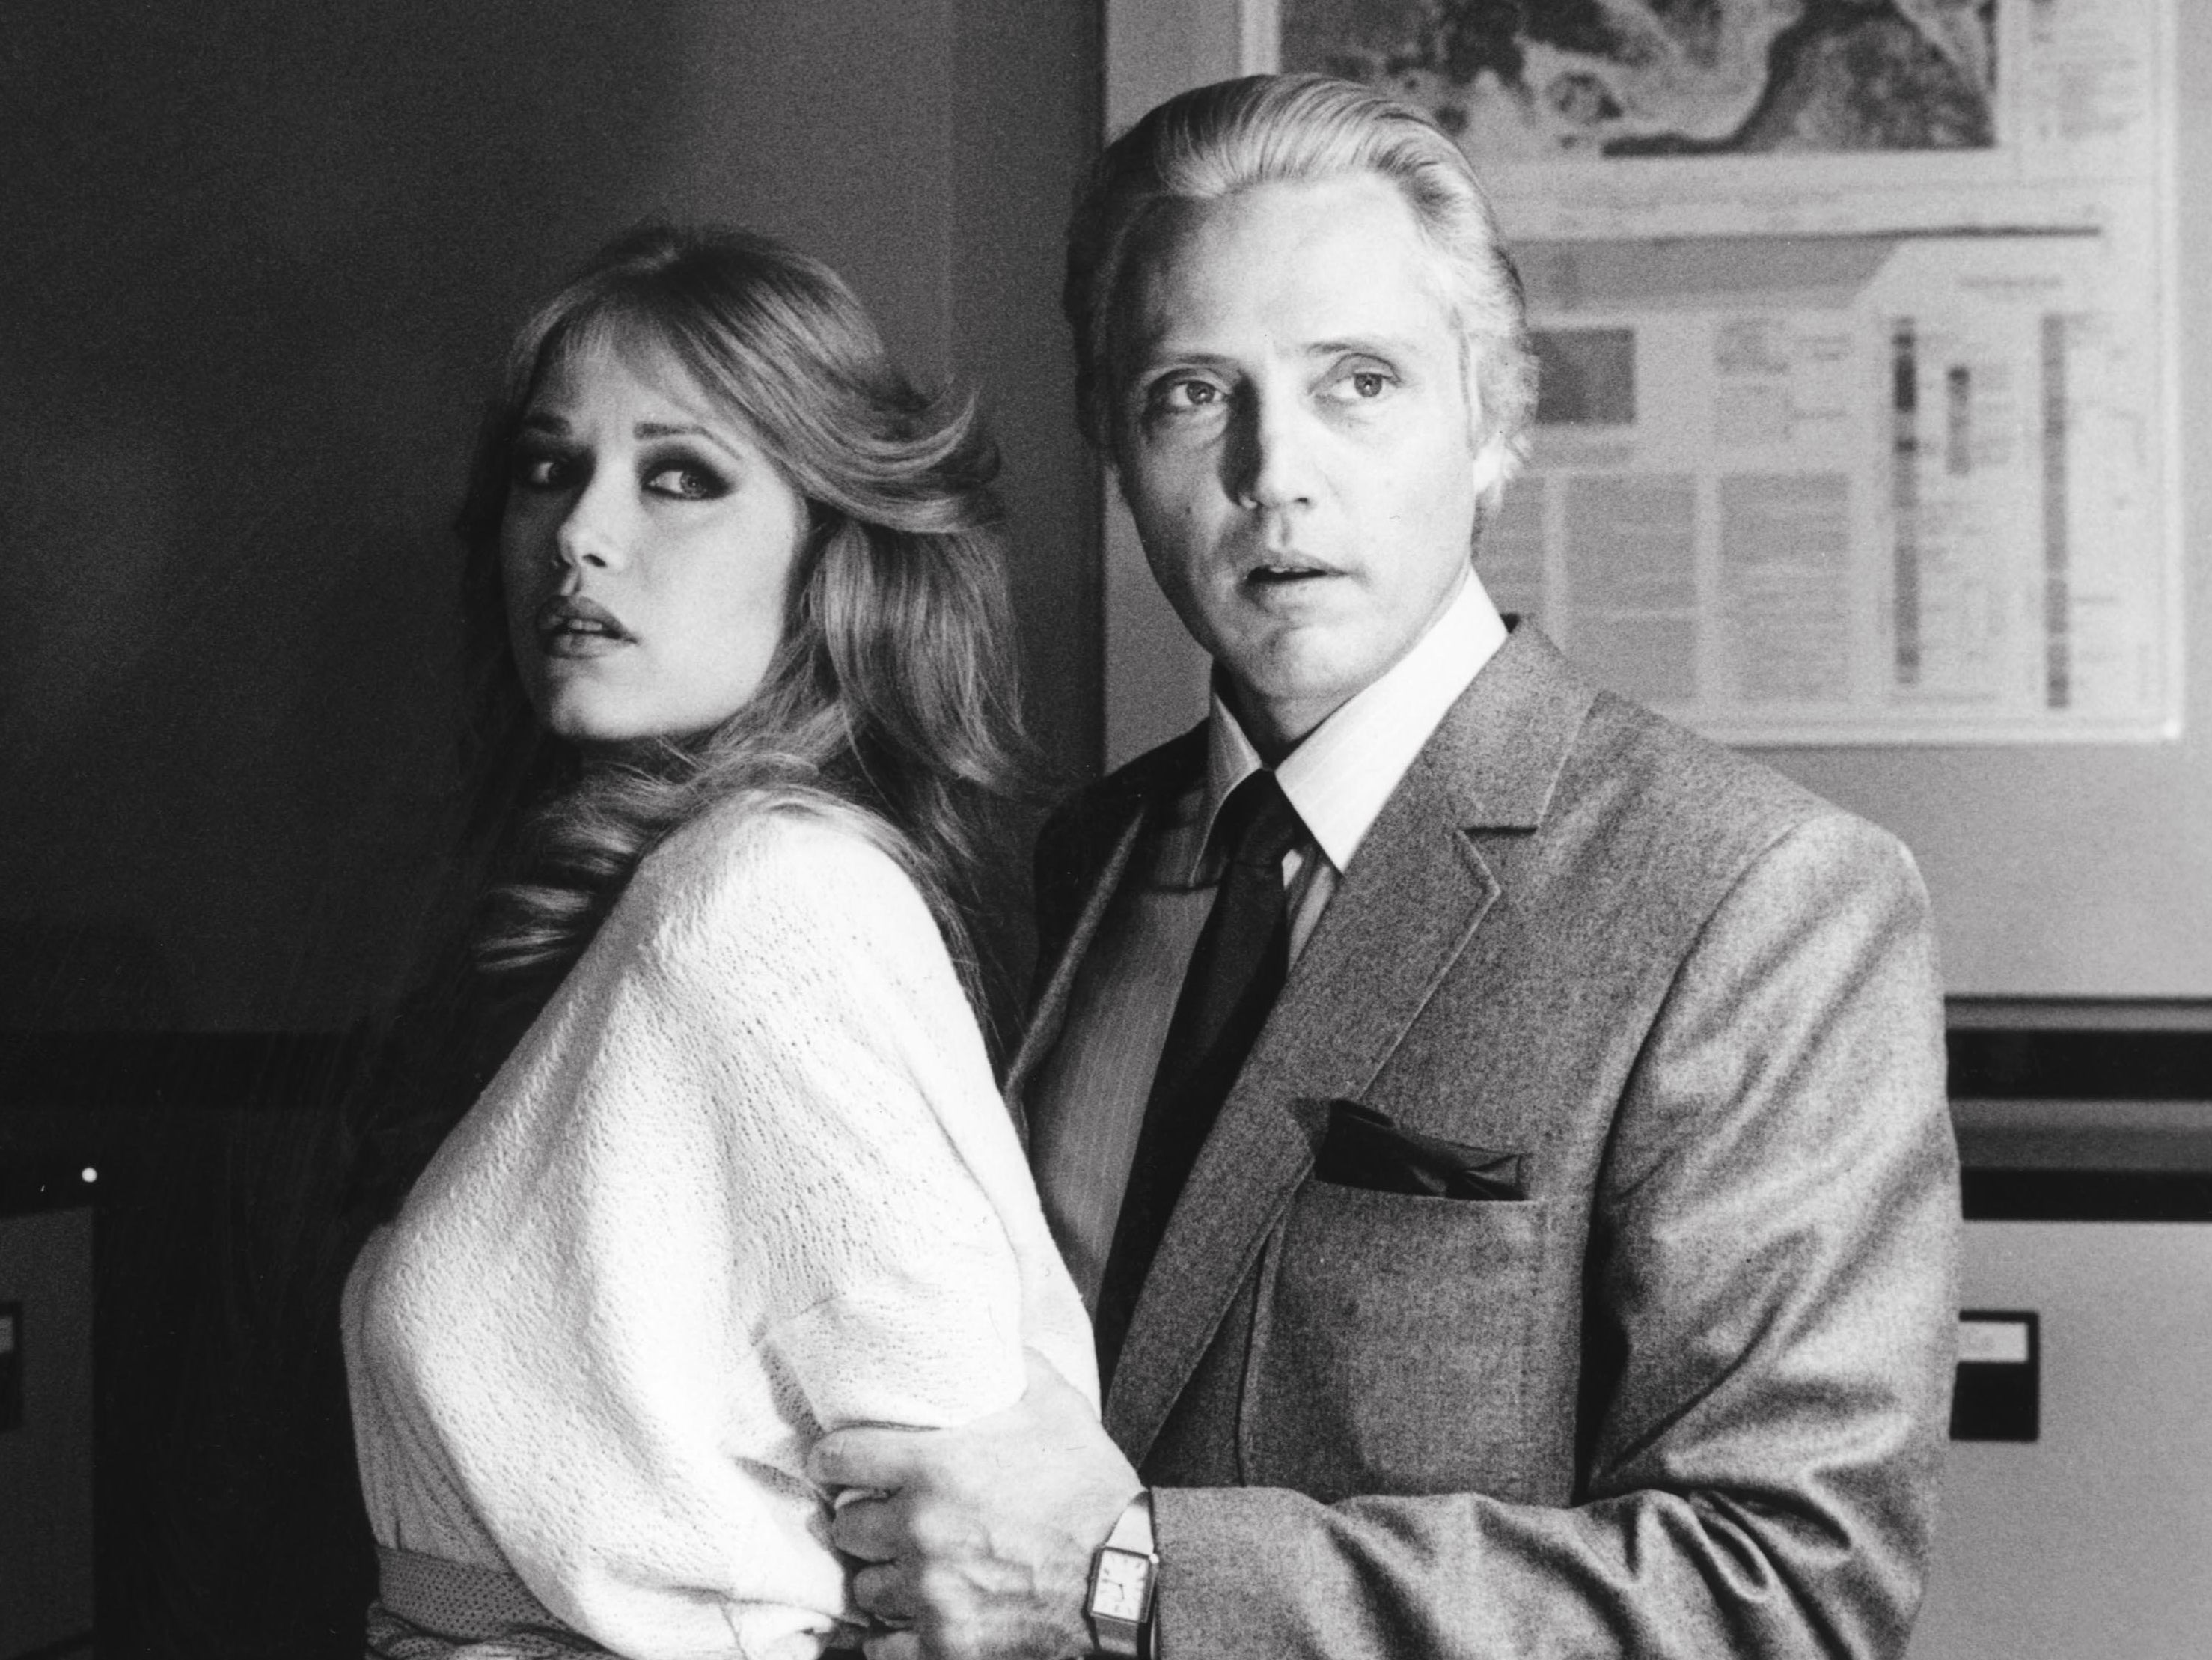 Tanya Roberts and Christopher Walken in A View to a Kill